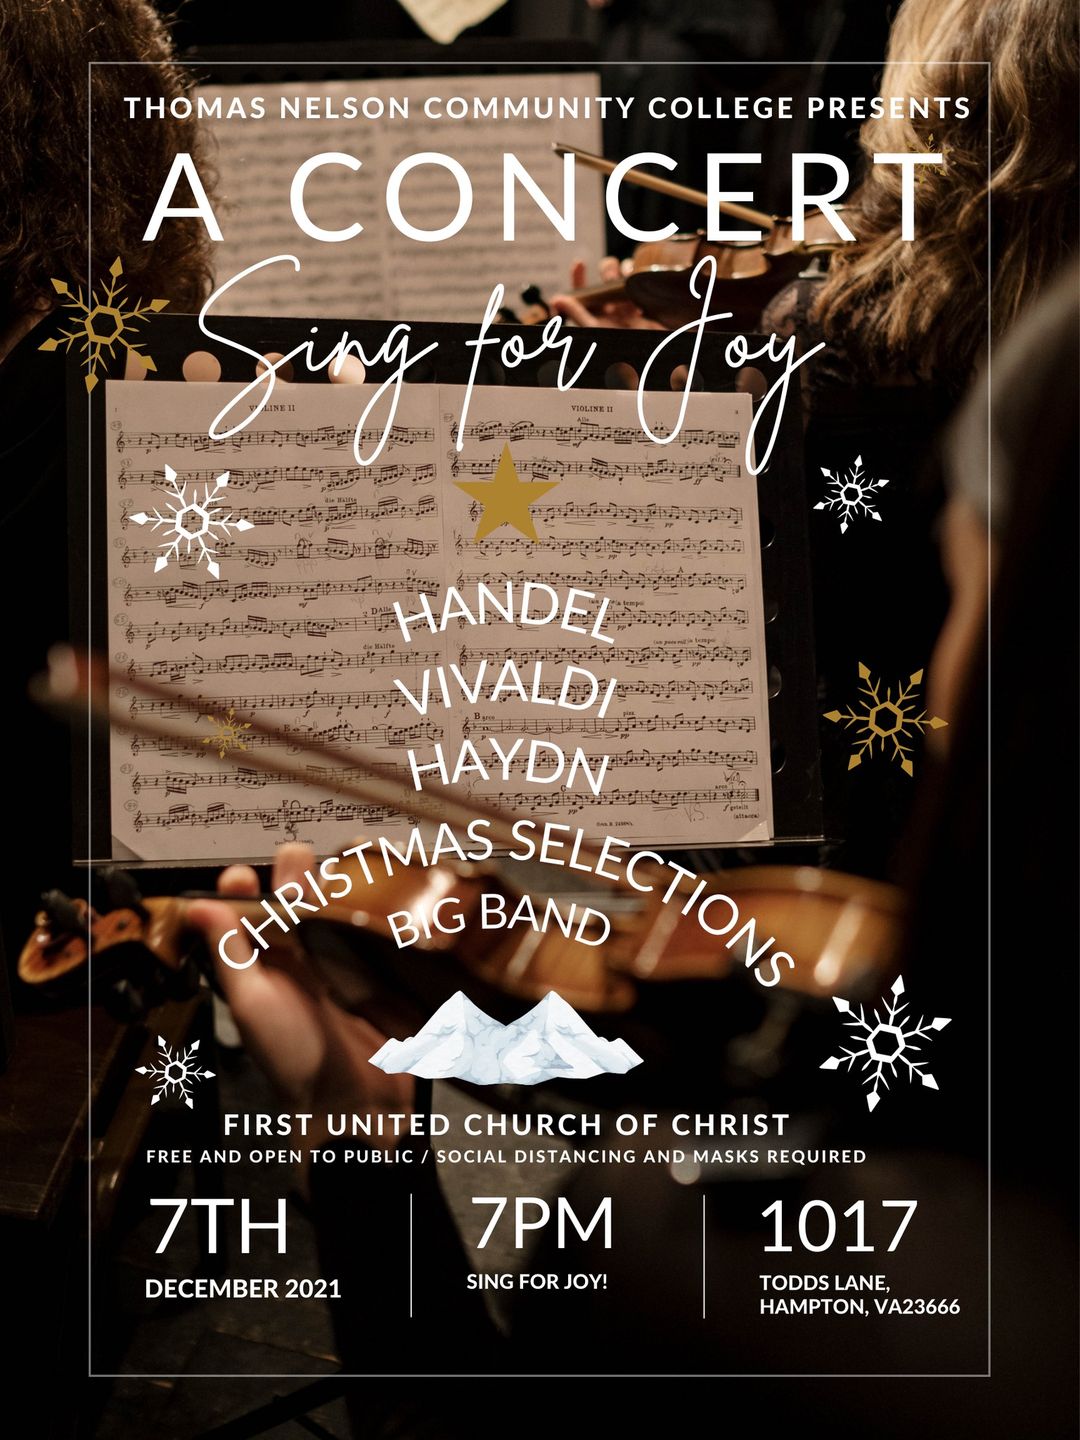 Image for Performing Arts Returning to Live Shows with Dec. 7 Choir Concert